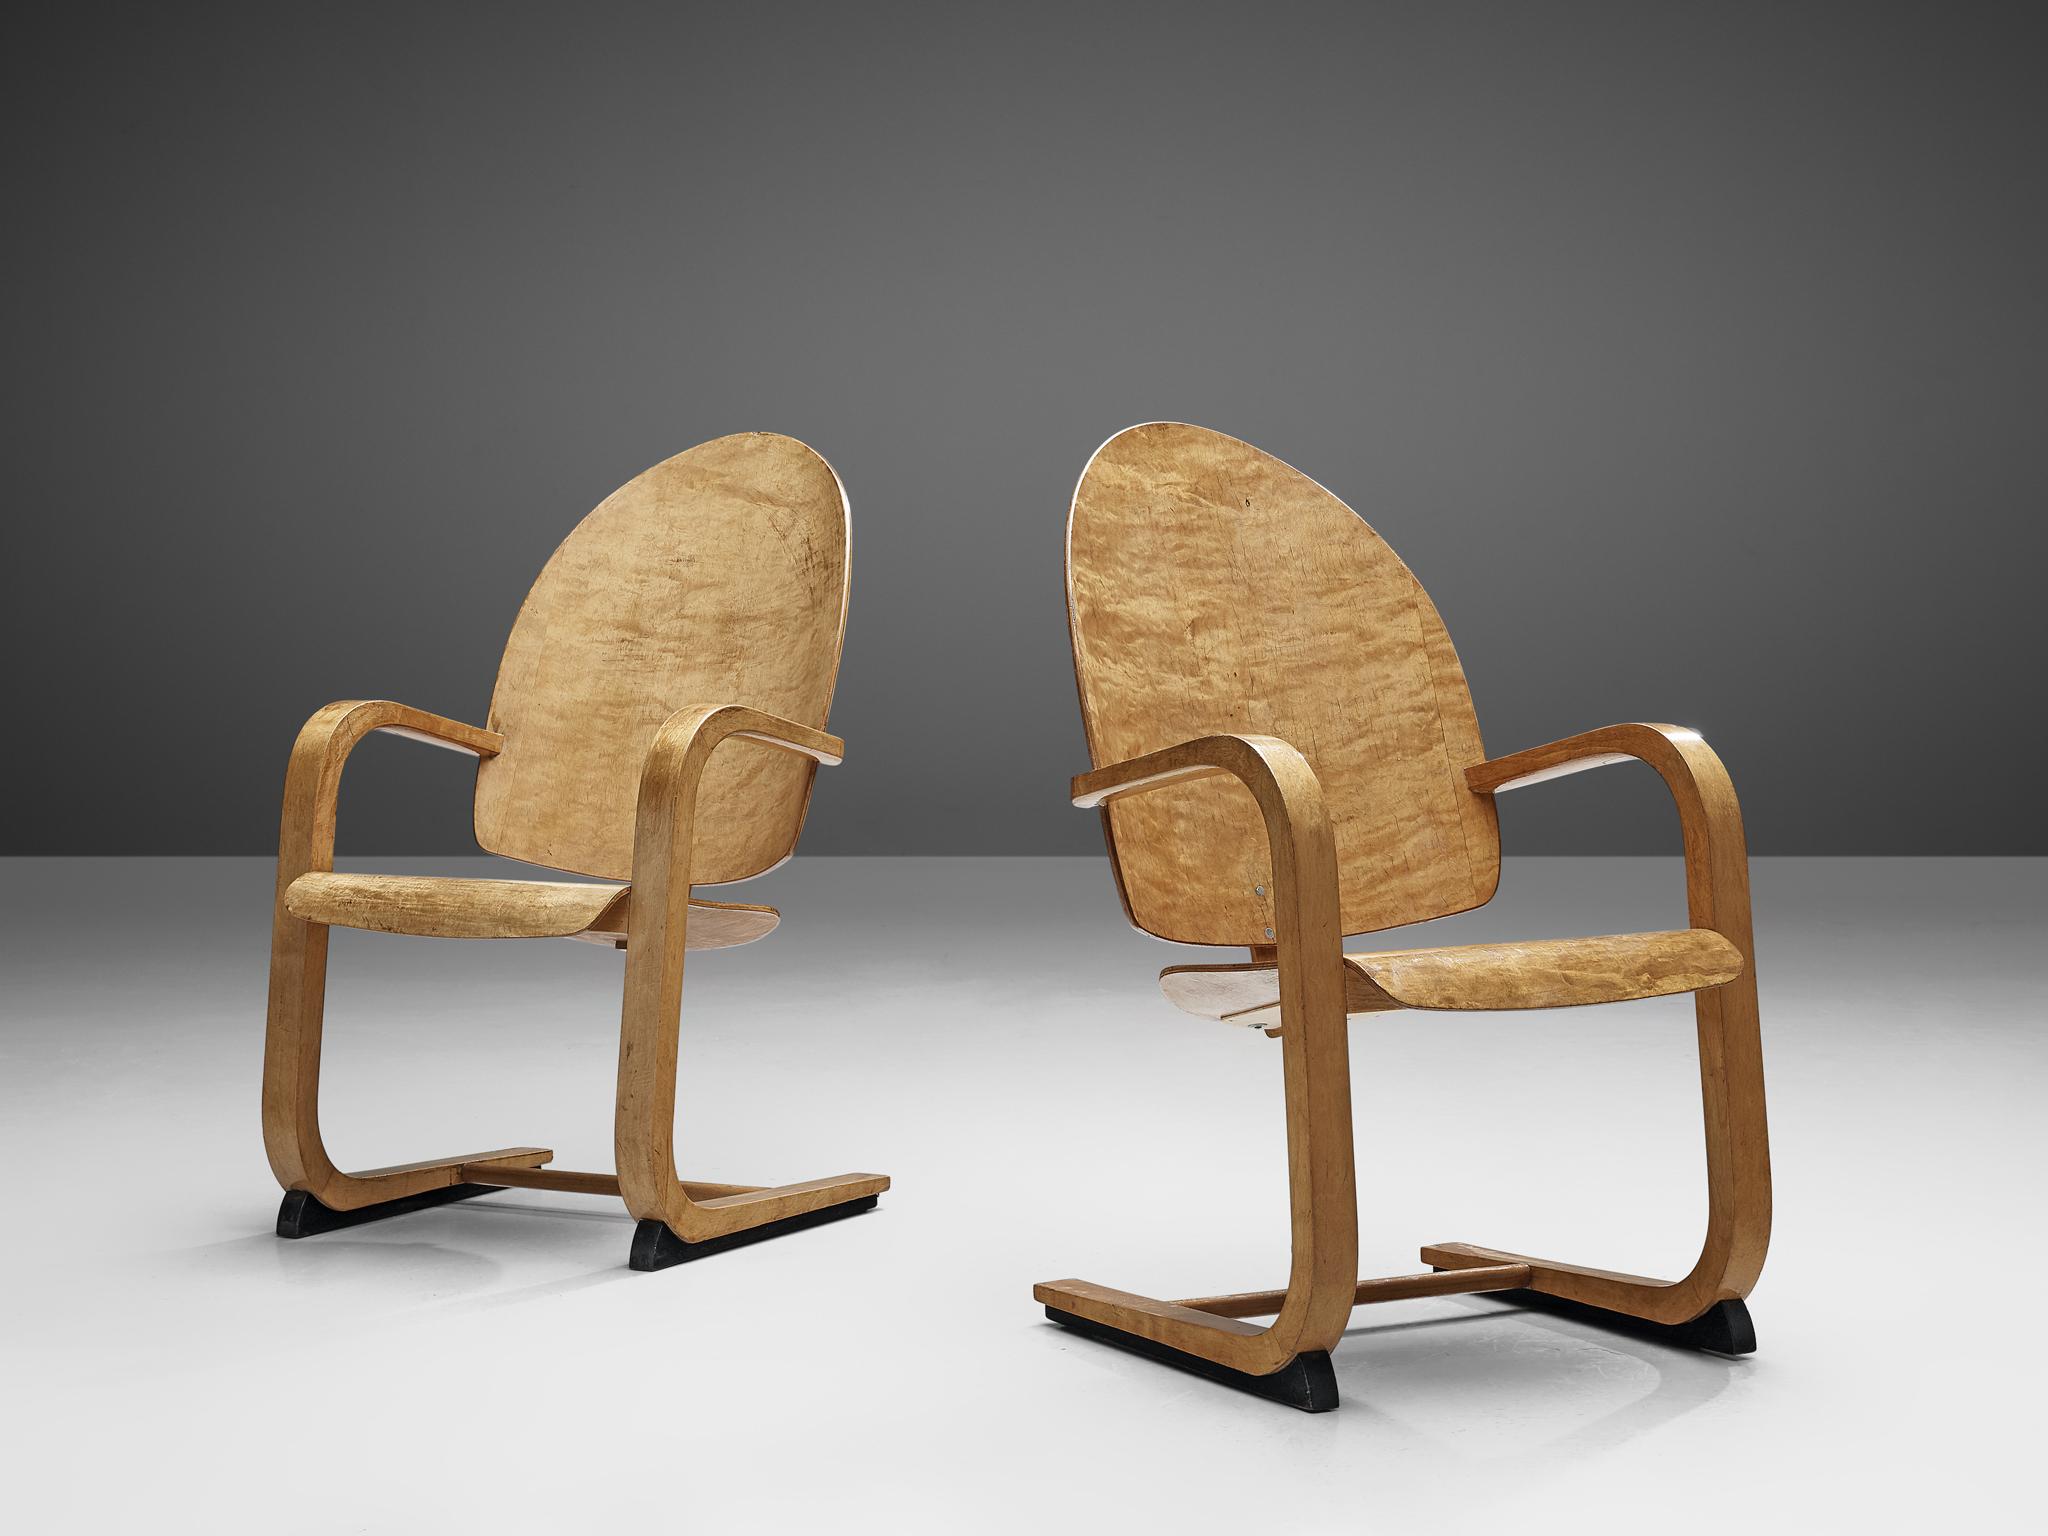 European Pair of Cantilever Armchairs in Birch, 1930s